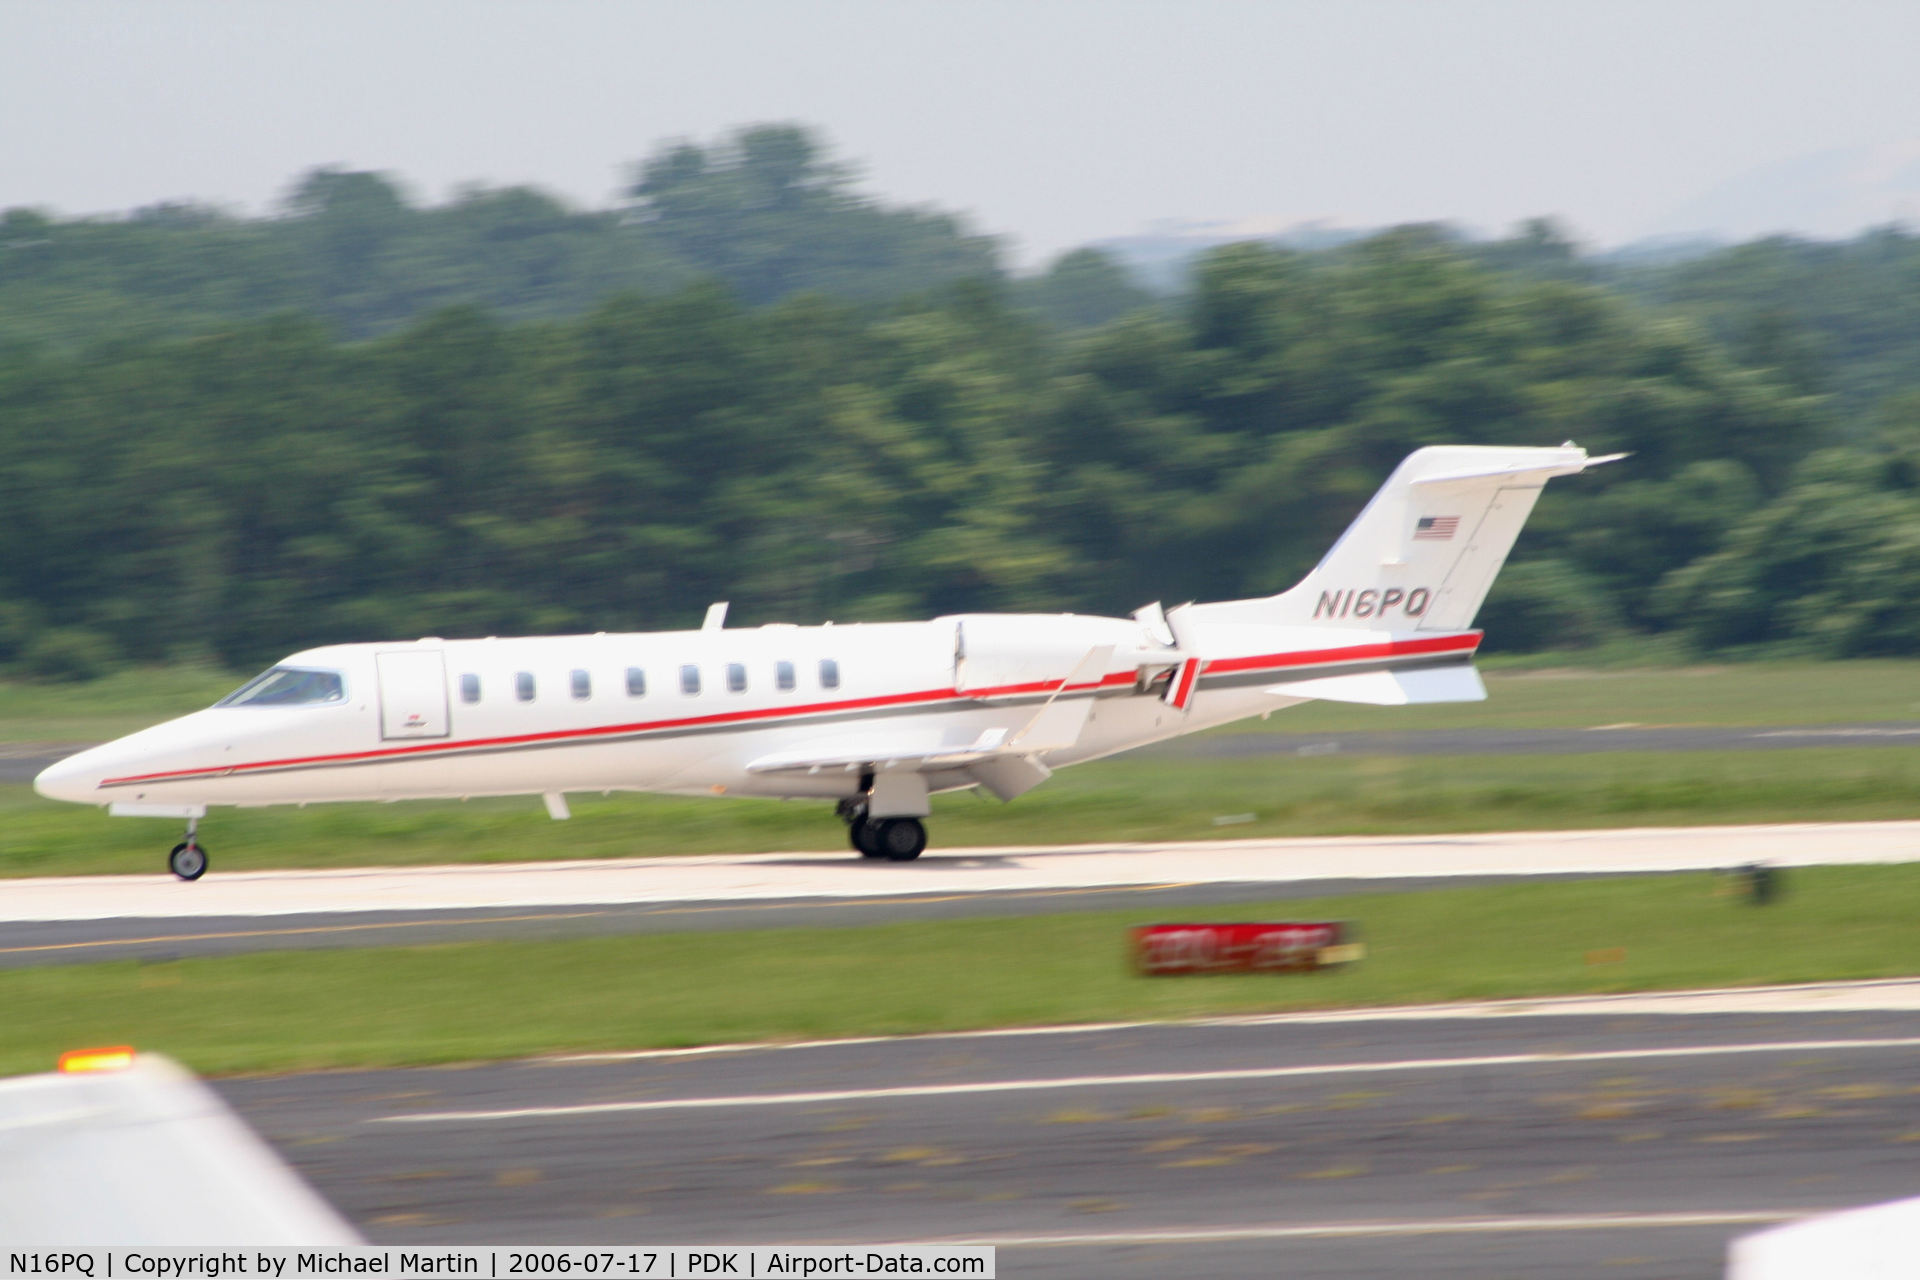 N16PQ, 1999 Learjet 45 C/N 050, Southern Companies returning home to PDK